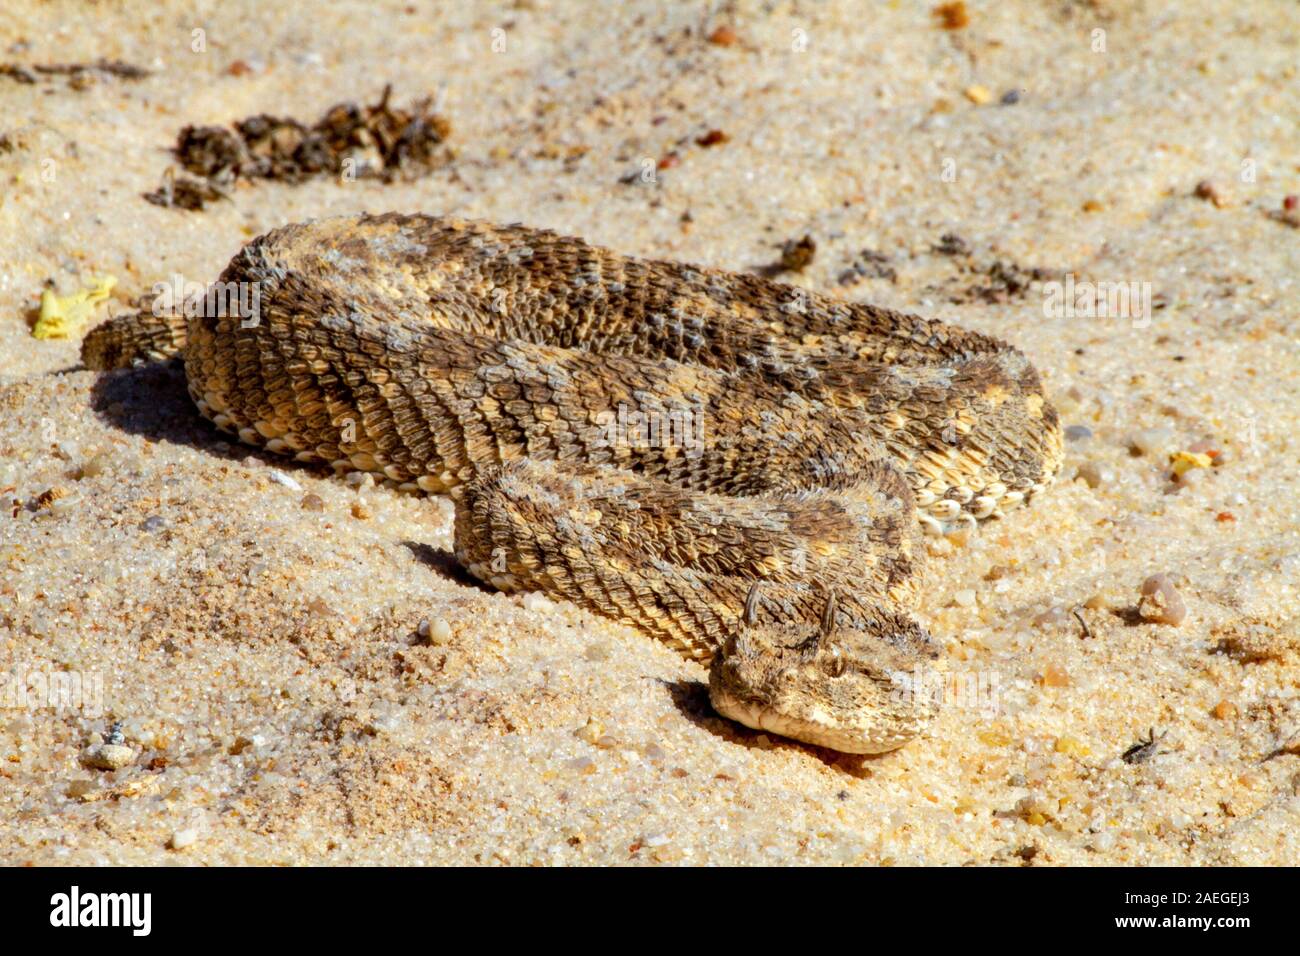 Cerastes cerastes is a venomous viper species native to the deserts of Northern Africa and parts of the Middle East. They often are easily recognized Stock Photo